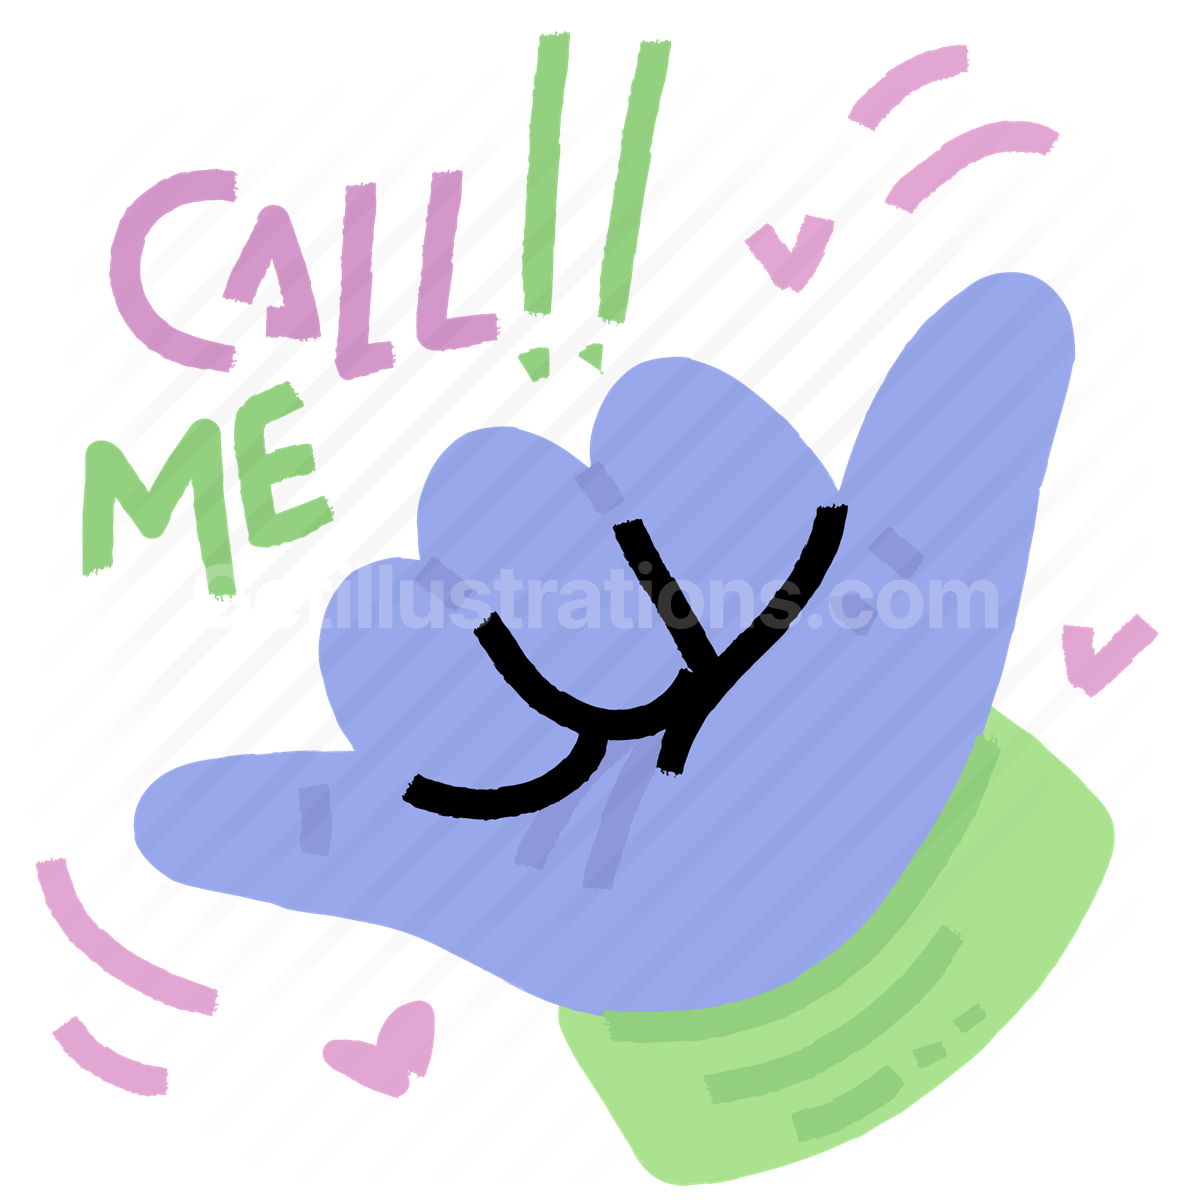 call me, hand, gesture, sticker, character, call